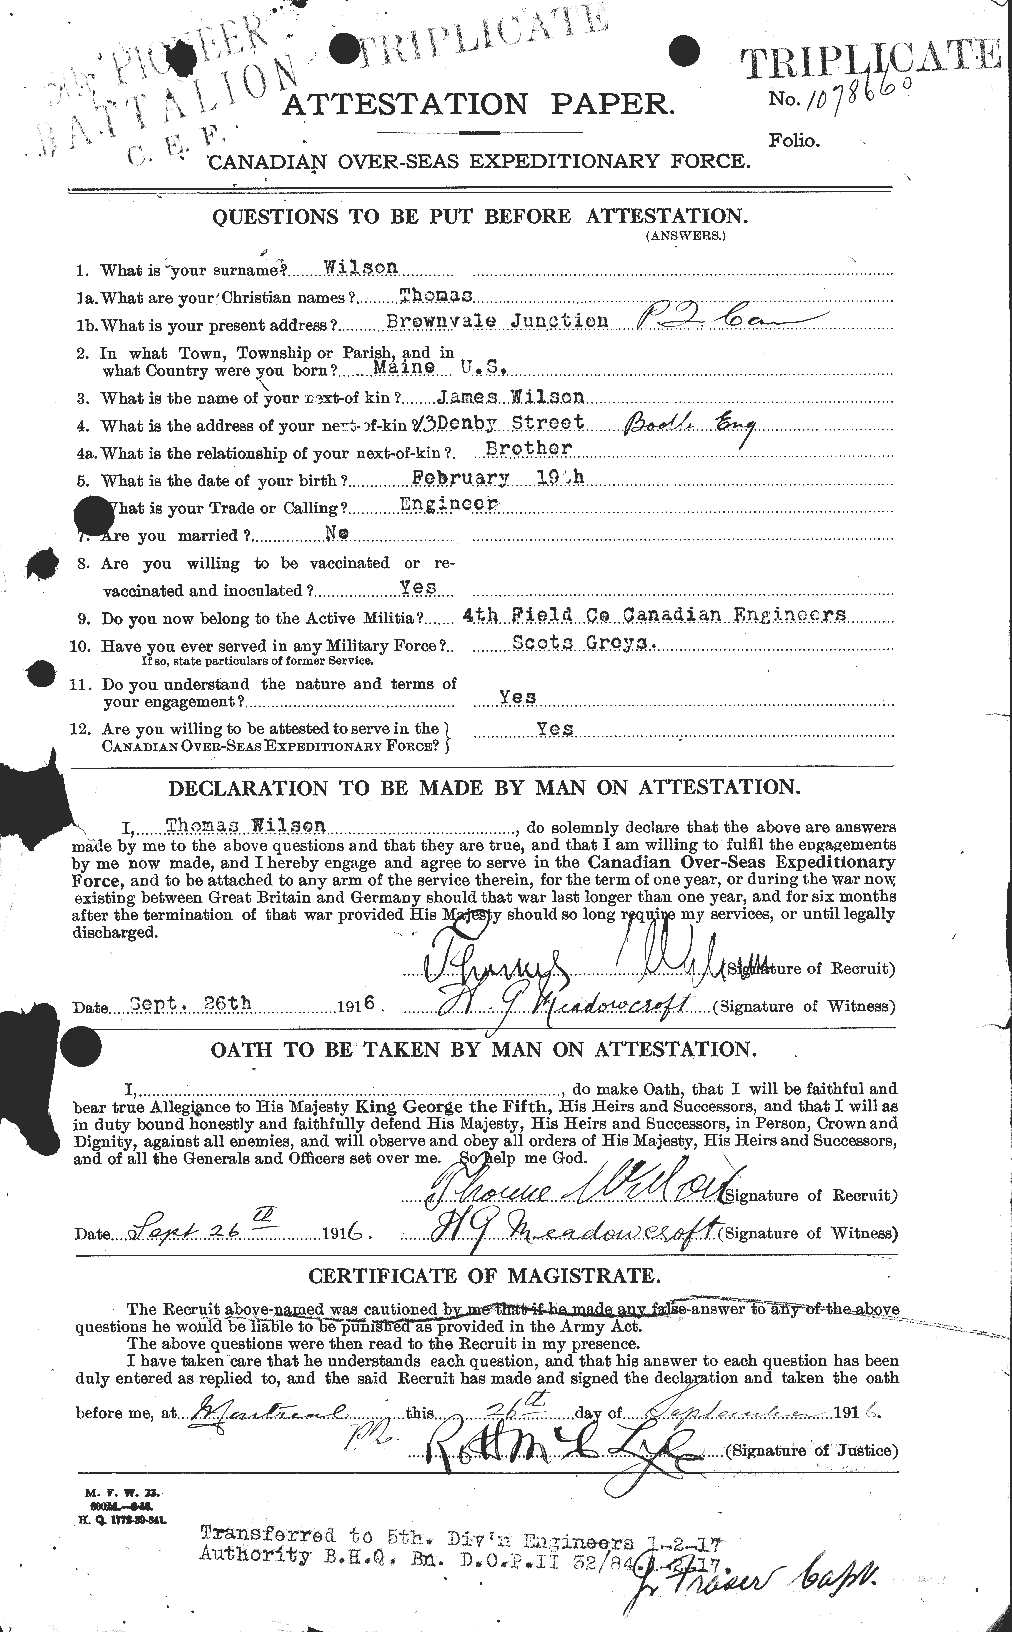 Personnel Records of the First World War - CEF 681186a